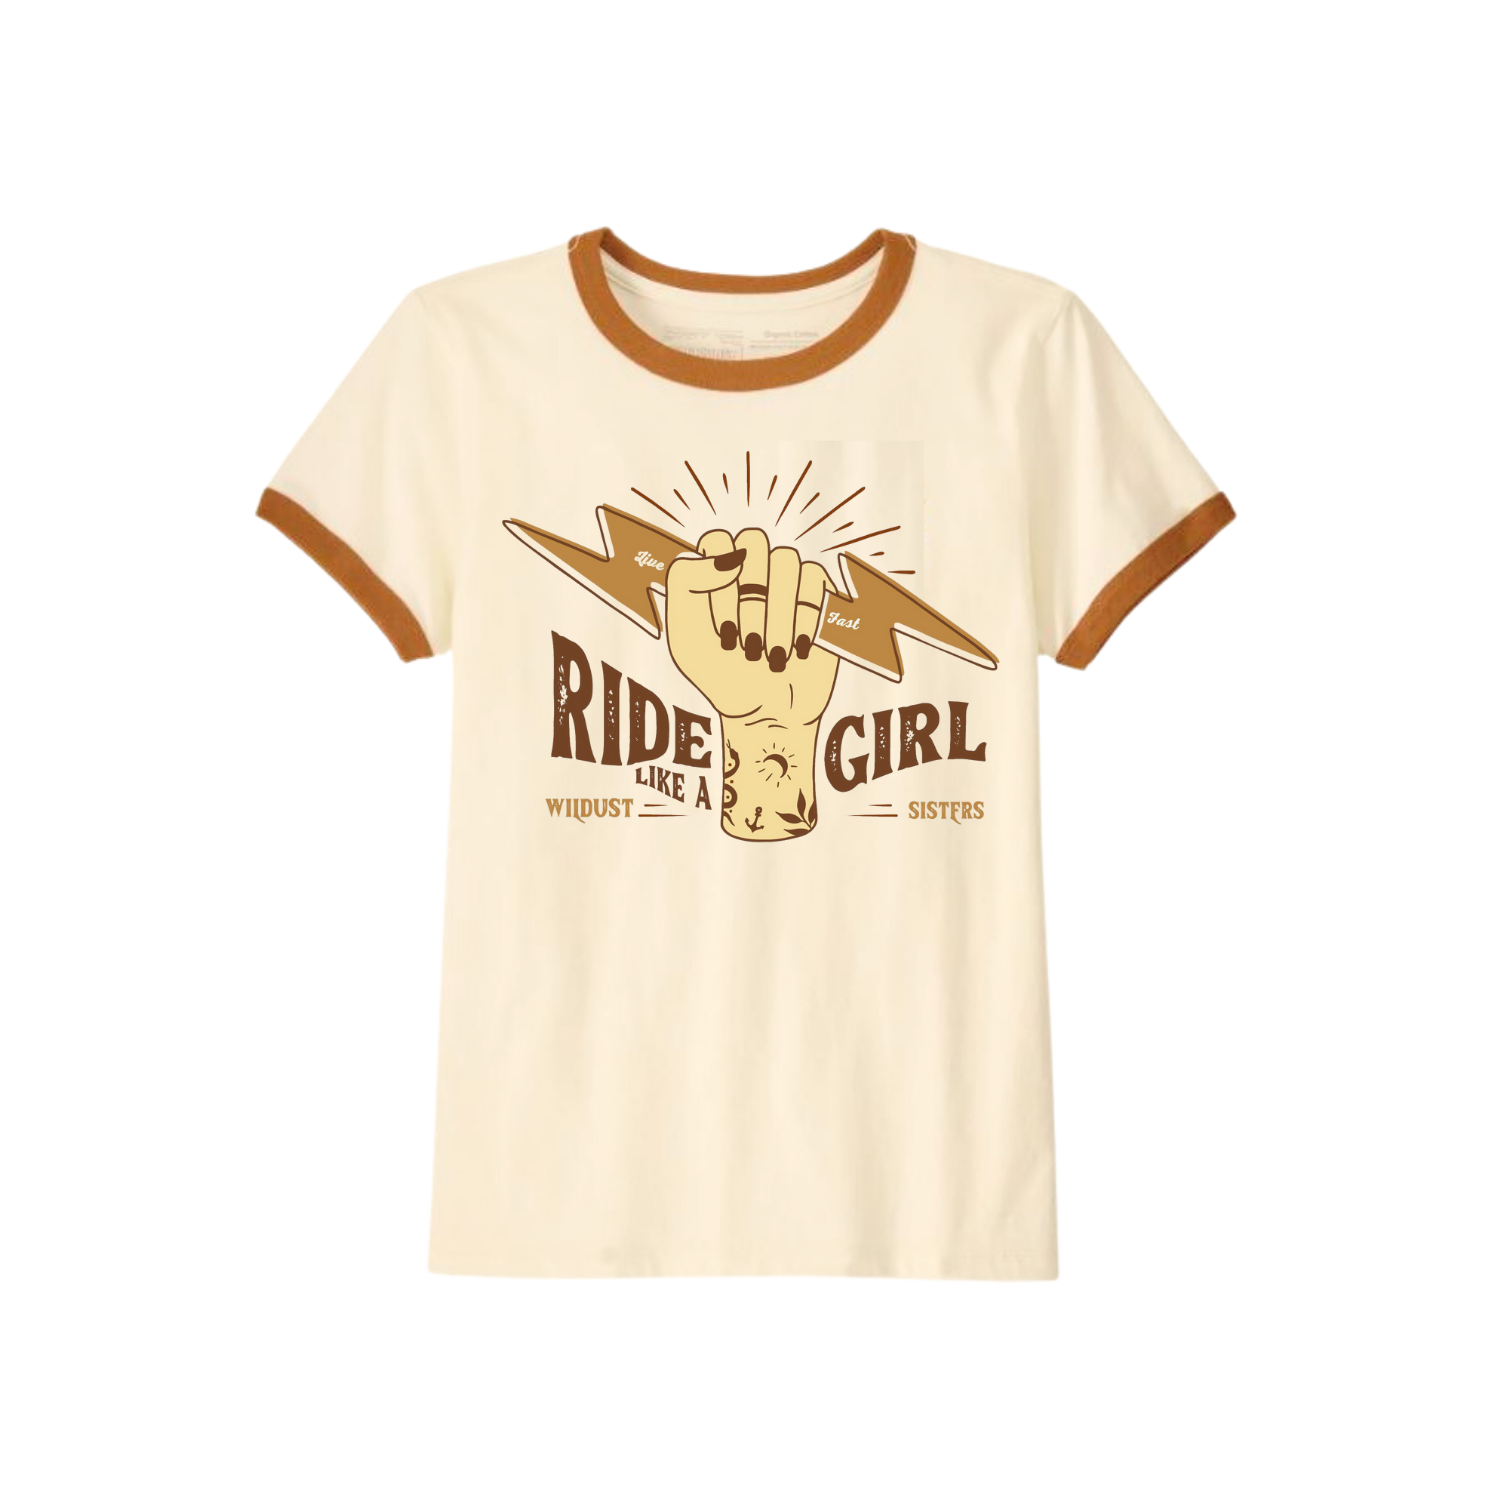 RIDE LIKE A GIRL retro style women&#39;s t-shirt from Wildust Sisters